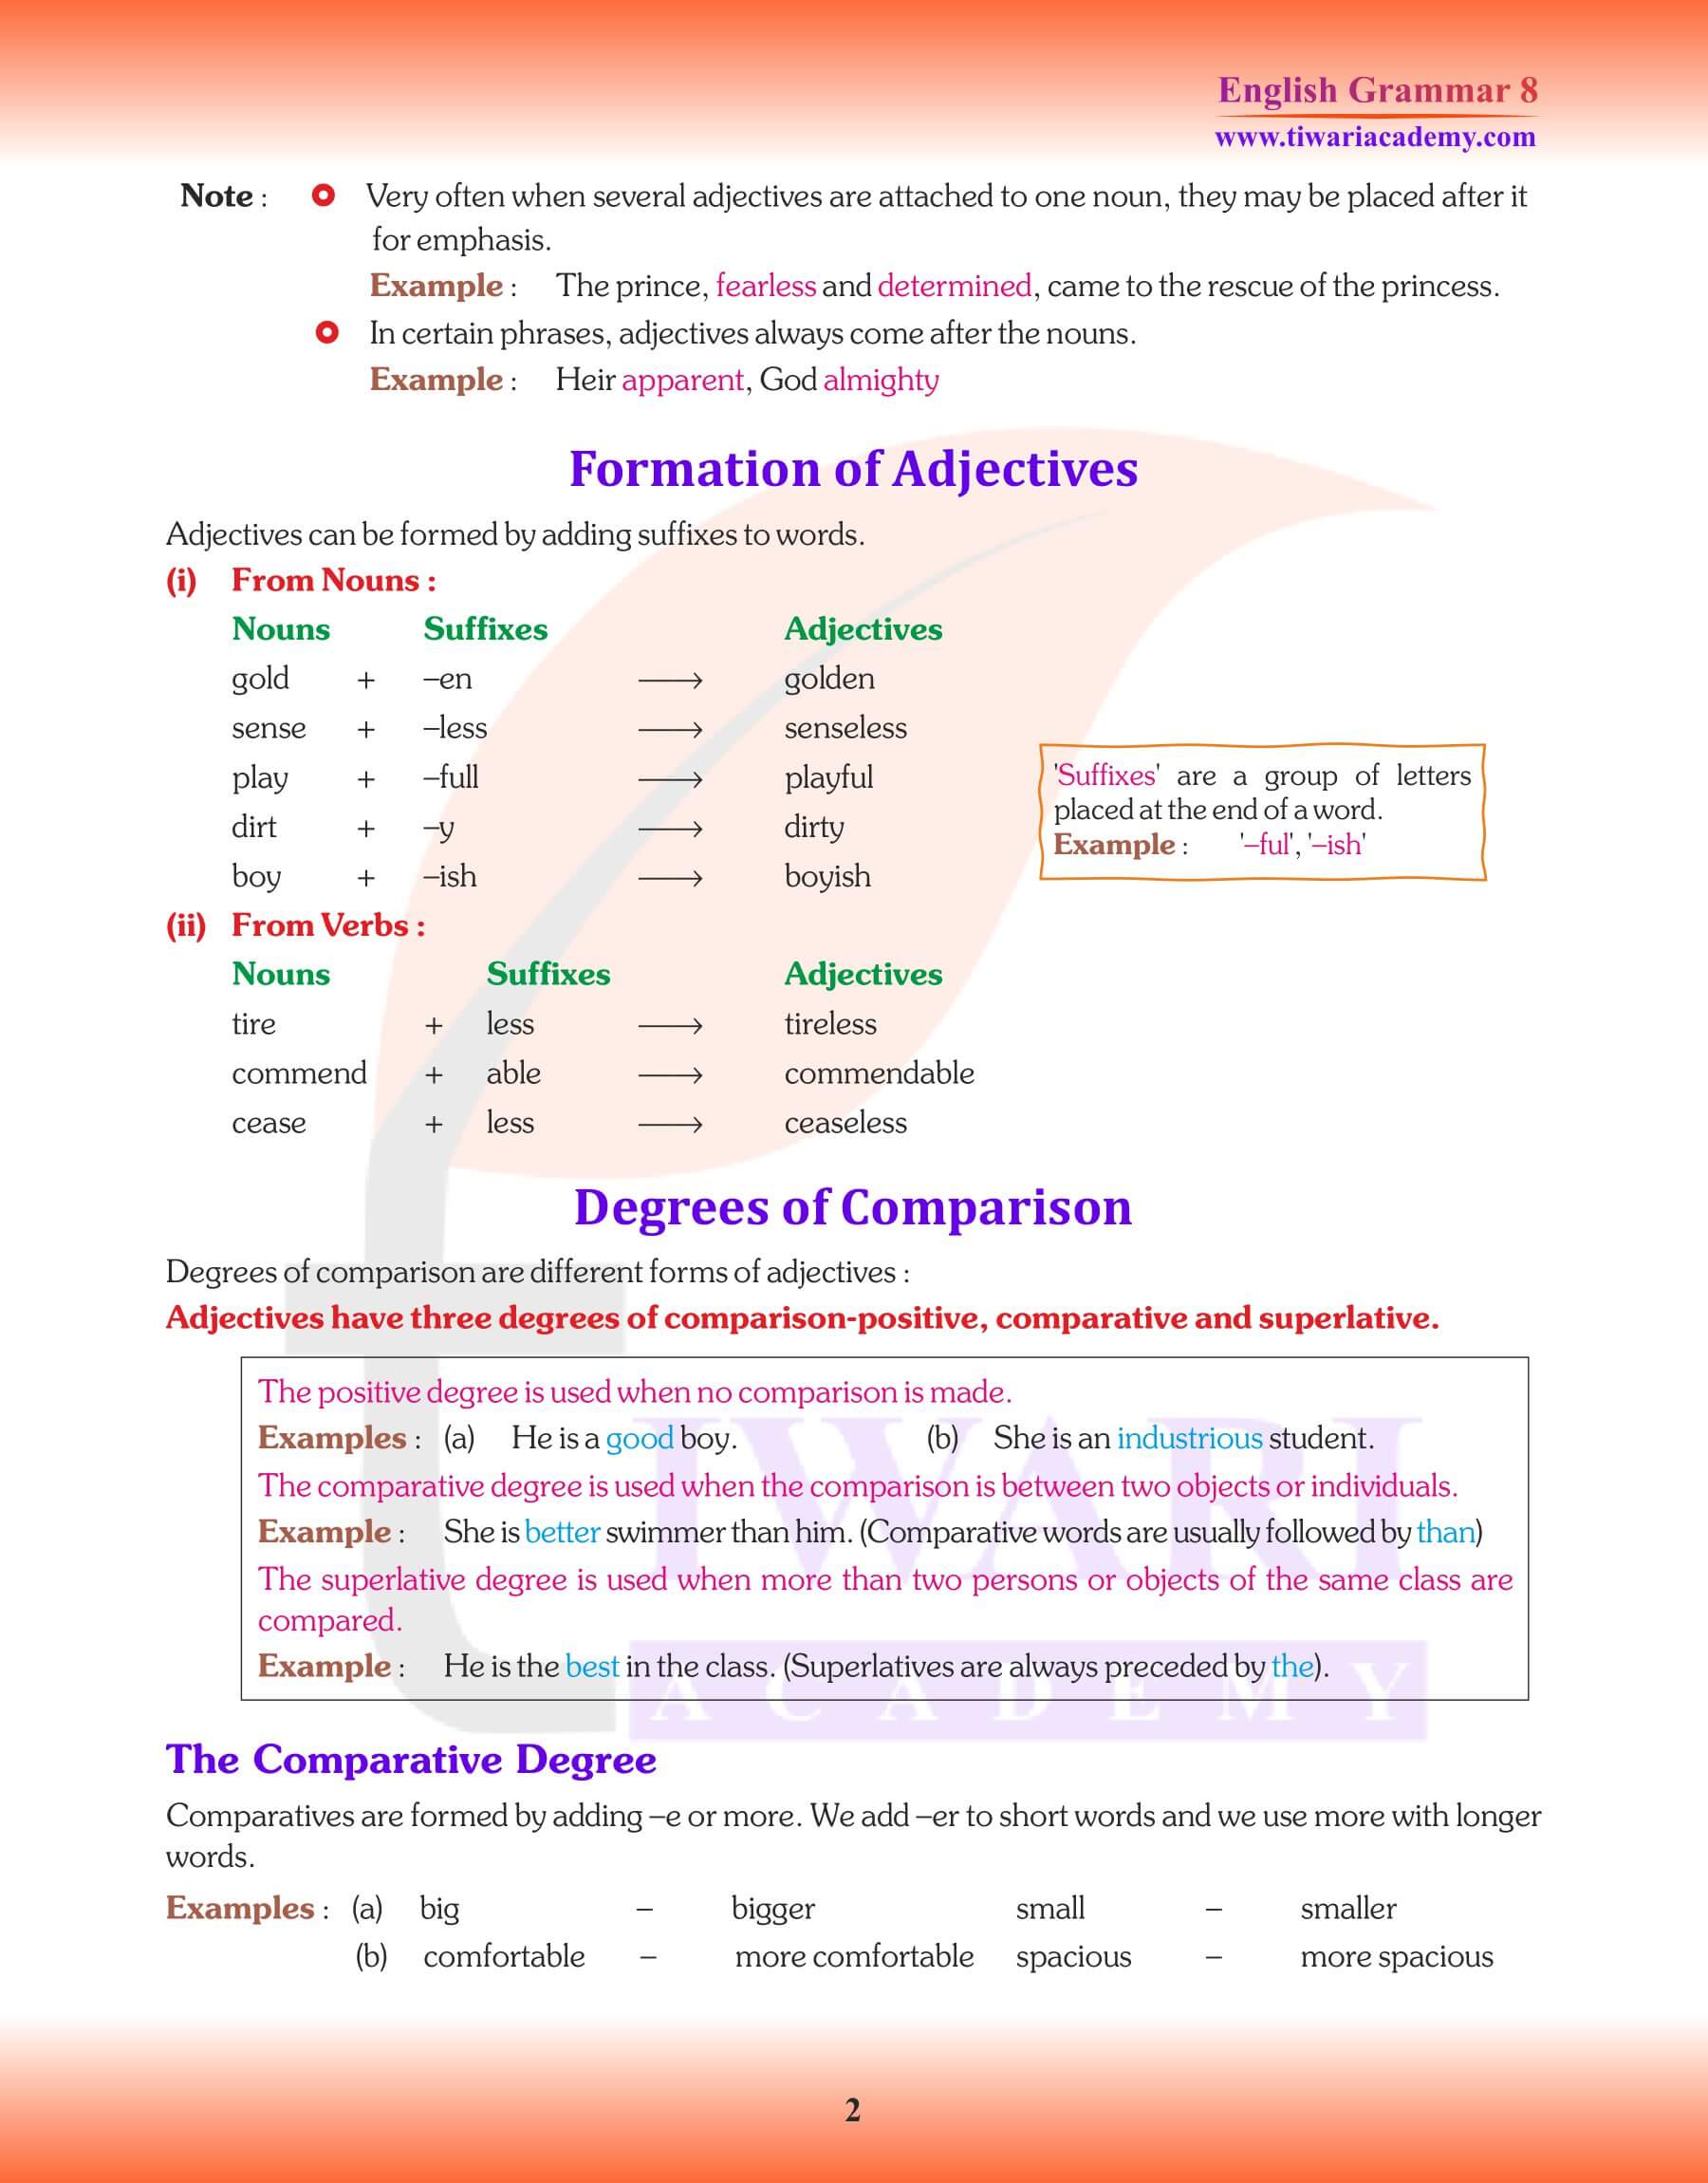 Class 8 English Grammar different typs of Adjective